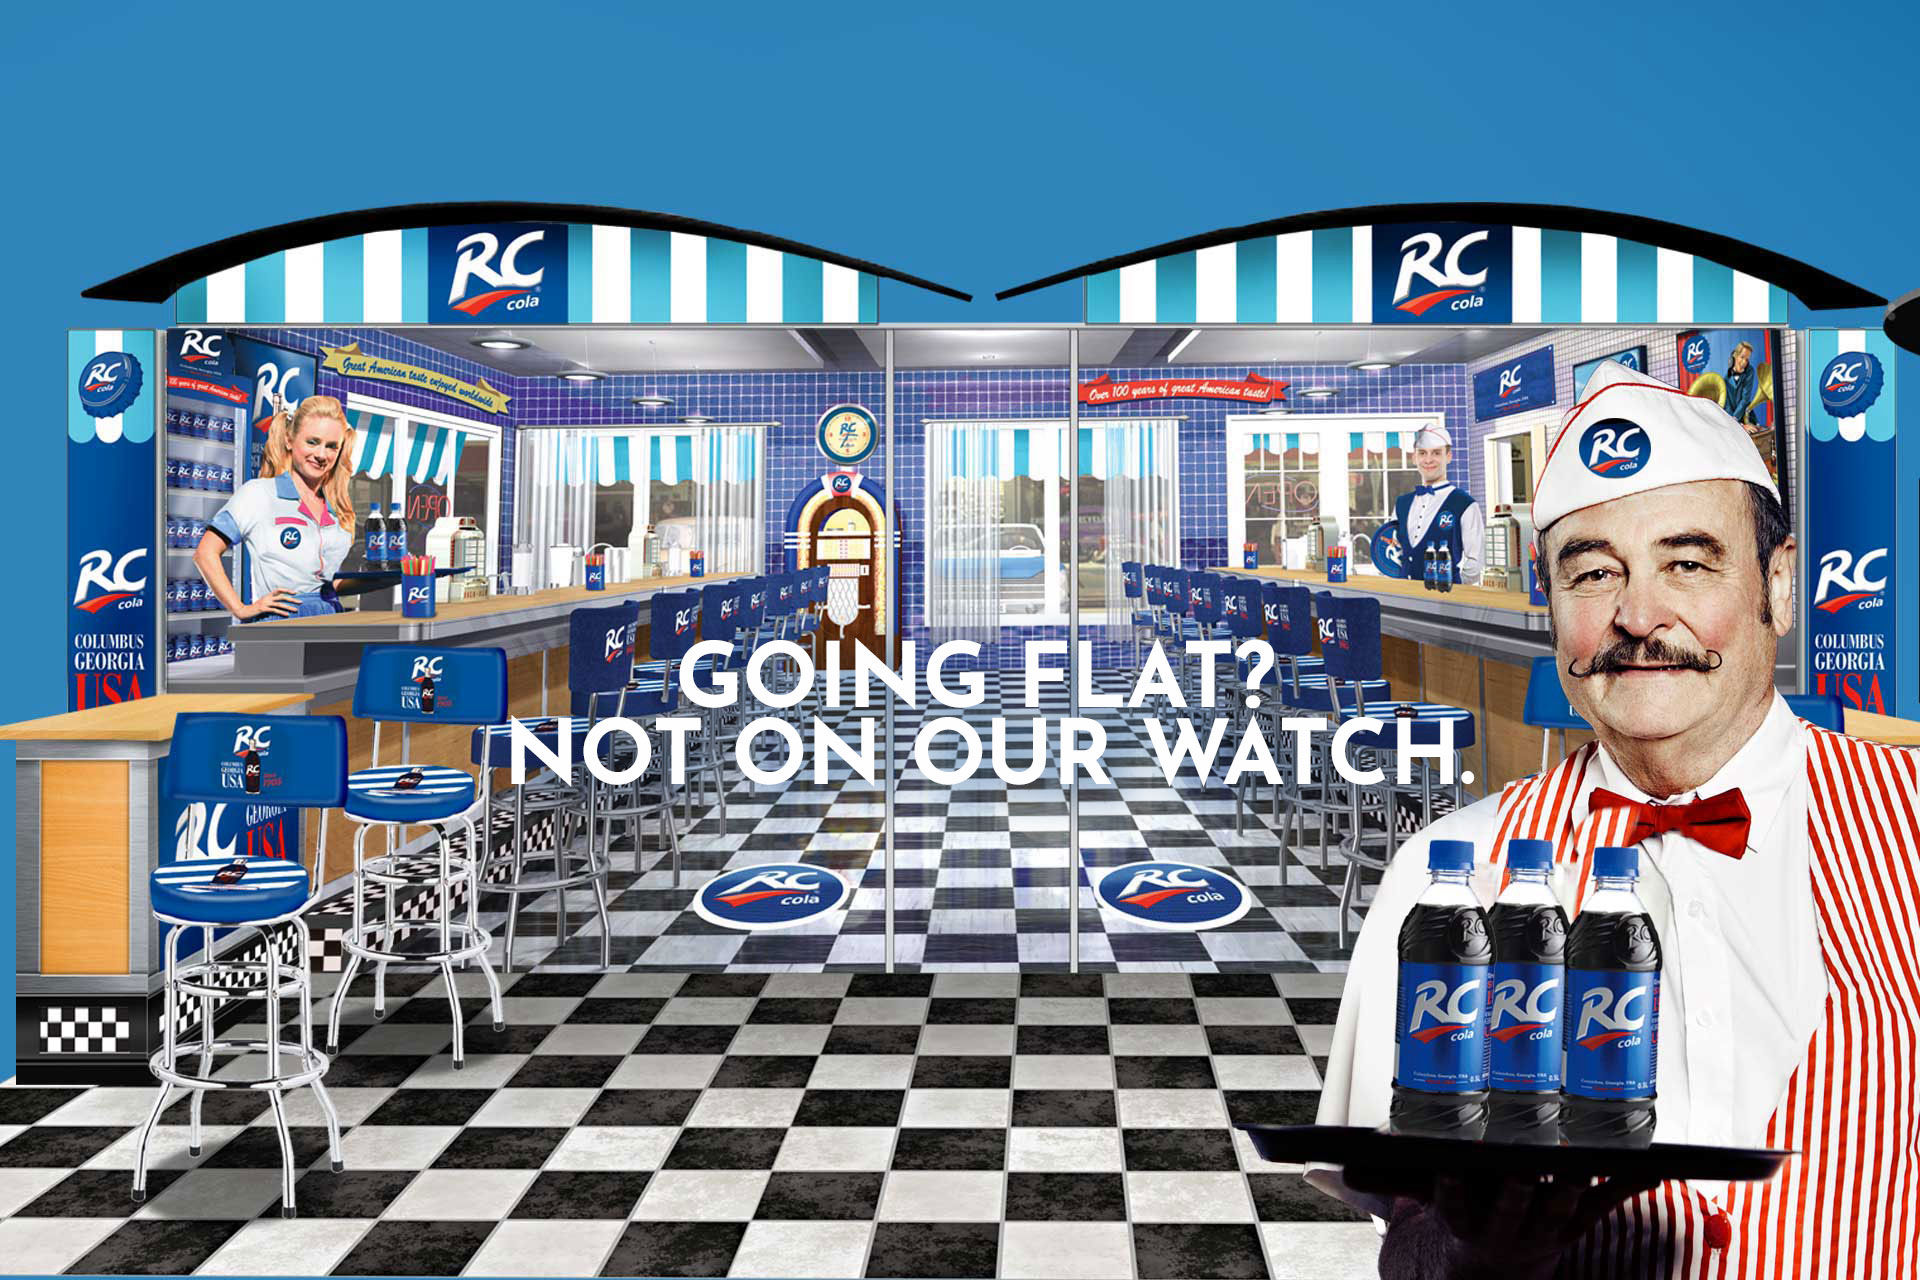 Going flat? Not on our watch.